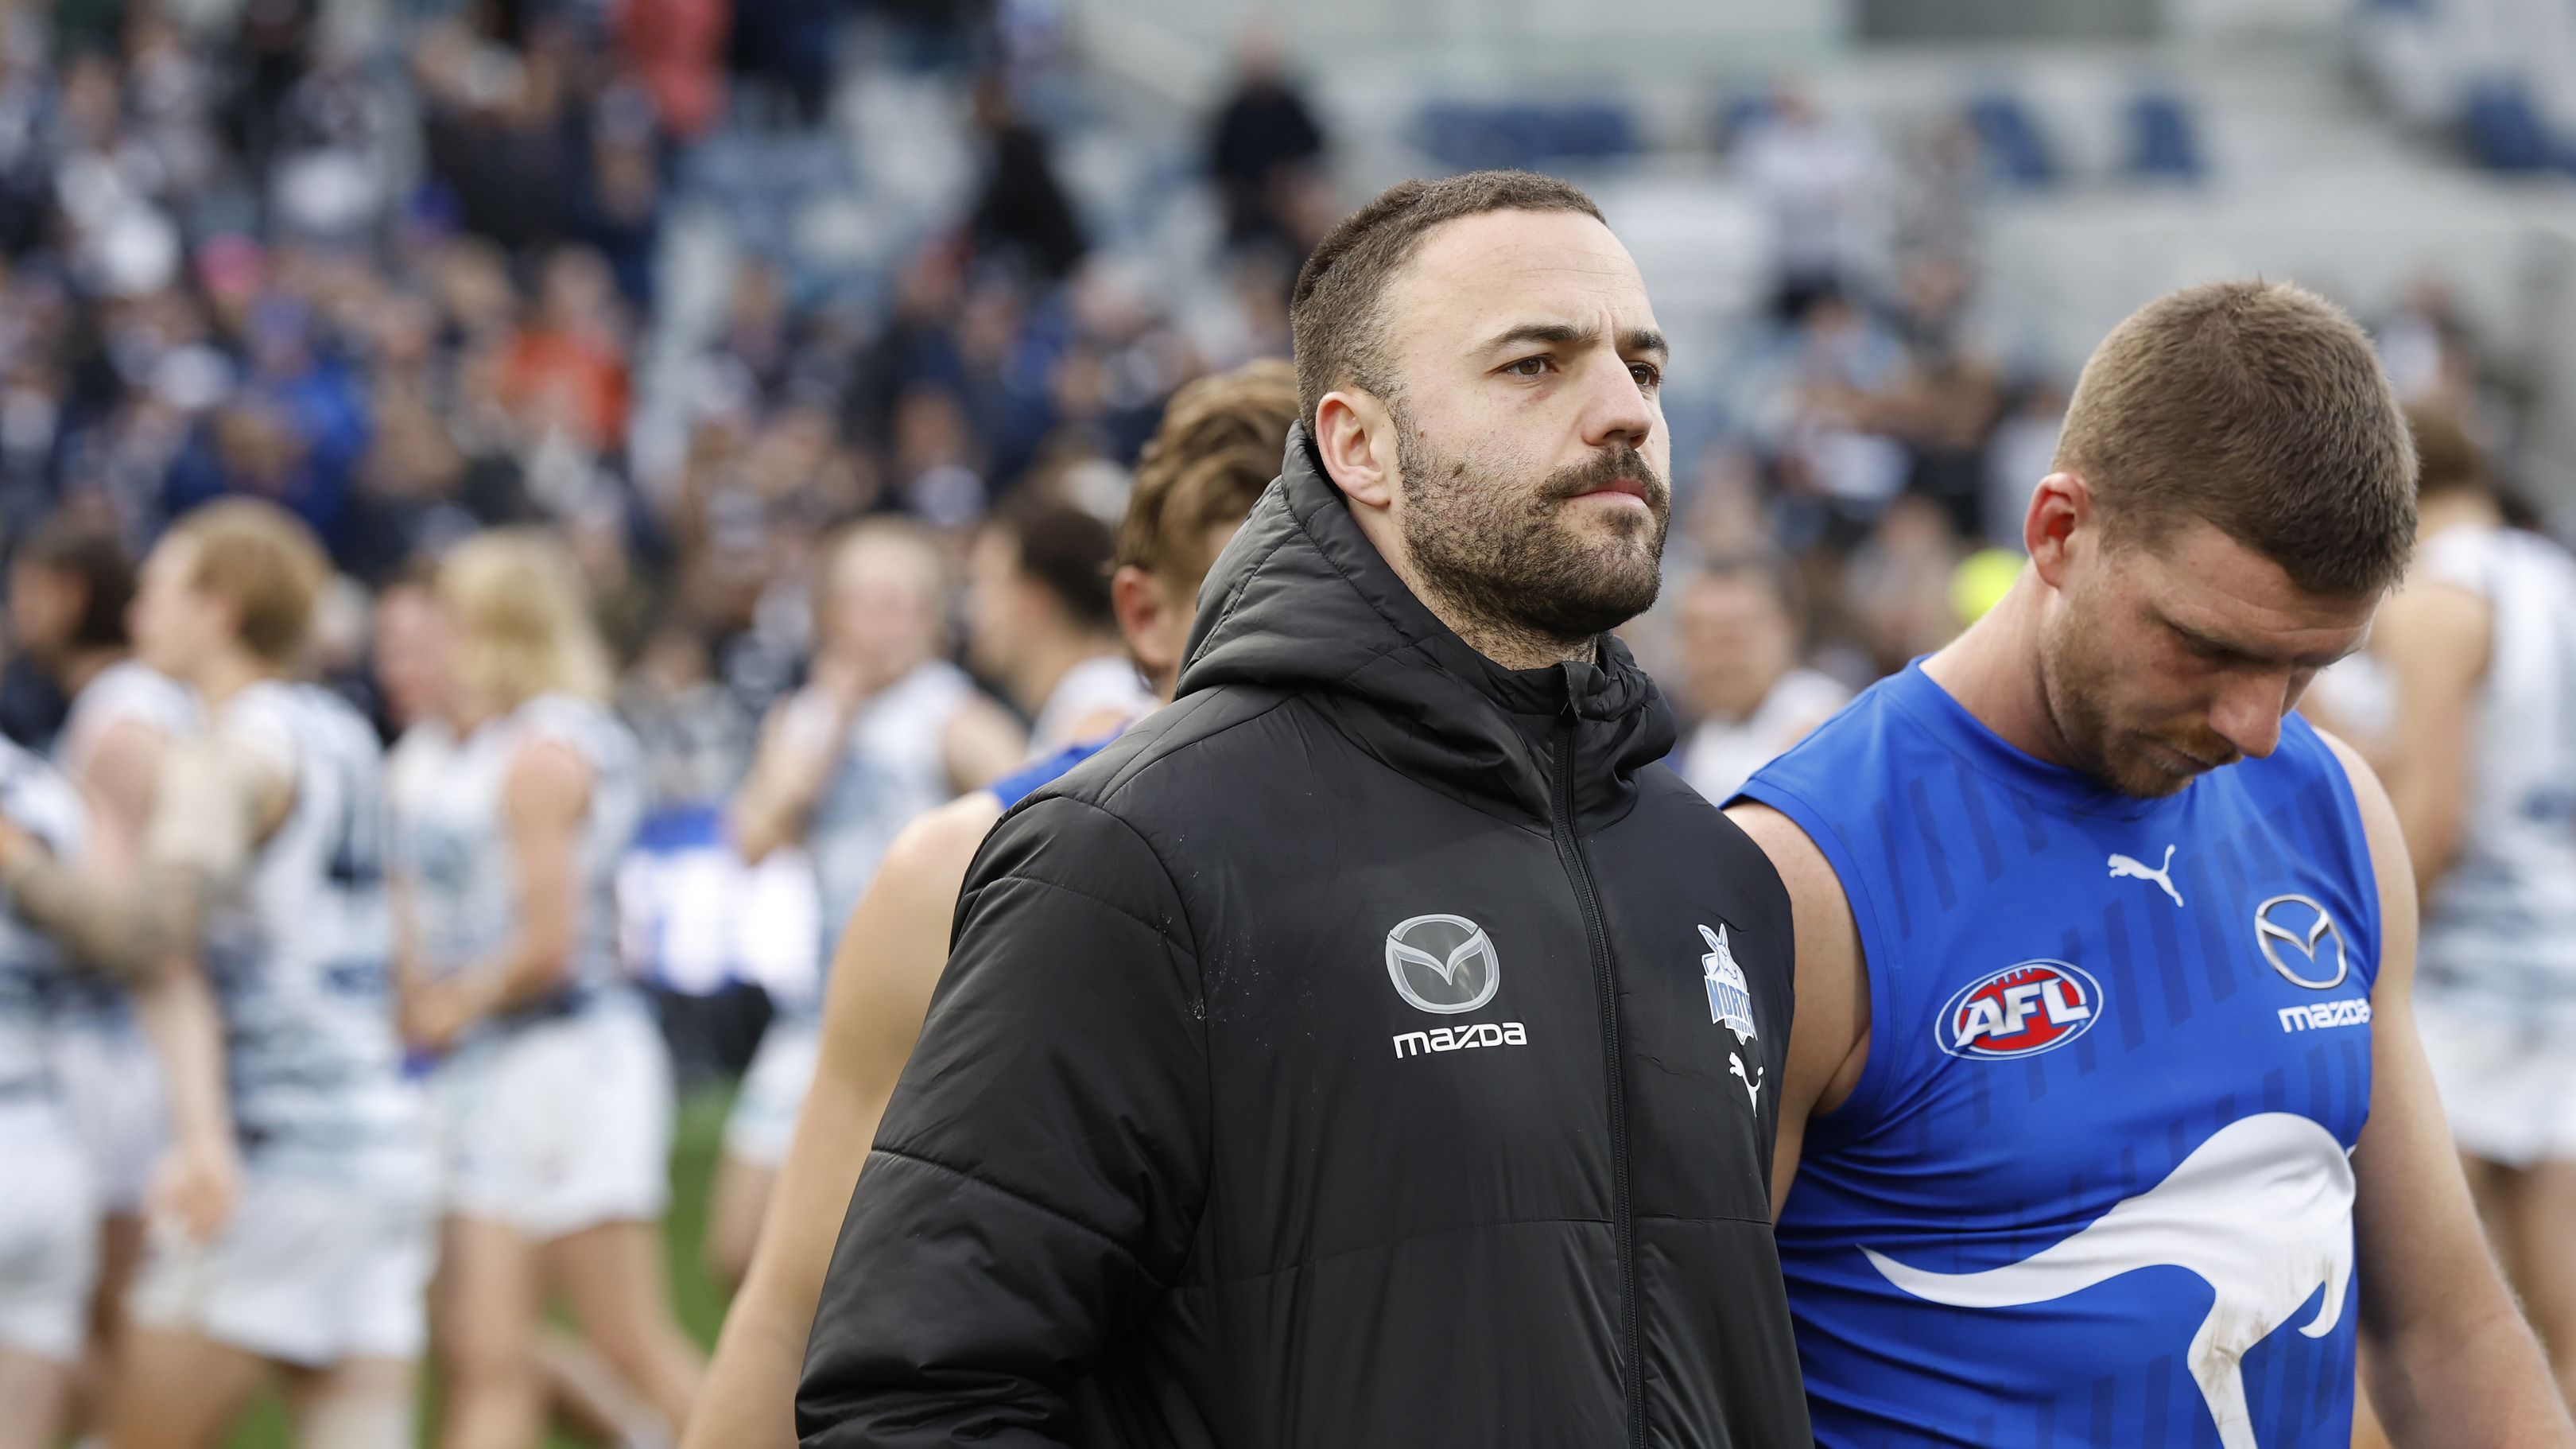 GEELONG, AUSTRALIA - JULY 09: Griffin Logue and Aidan Corr of the Kangaroos walk from the ground after during the round 17 AFL match between Geelong Cats and North Melbourne Kangaroos at GMHBA Stadium, on July 09, 2023, in Geelong, Australia. (Photo by Darrian Traynor/Getty Images)